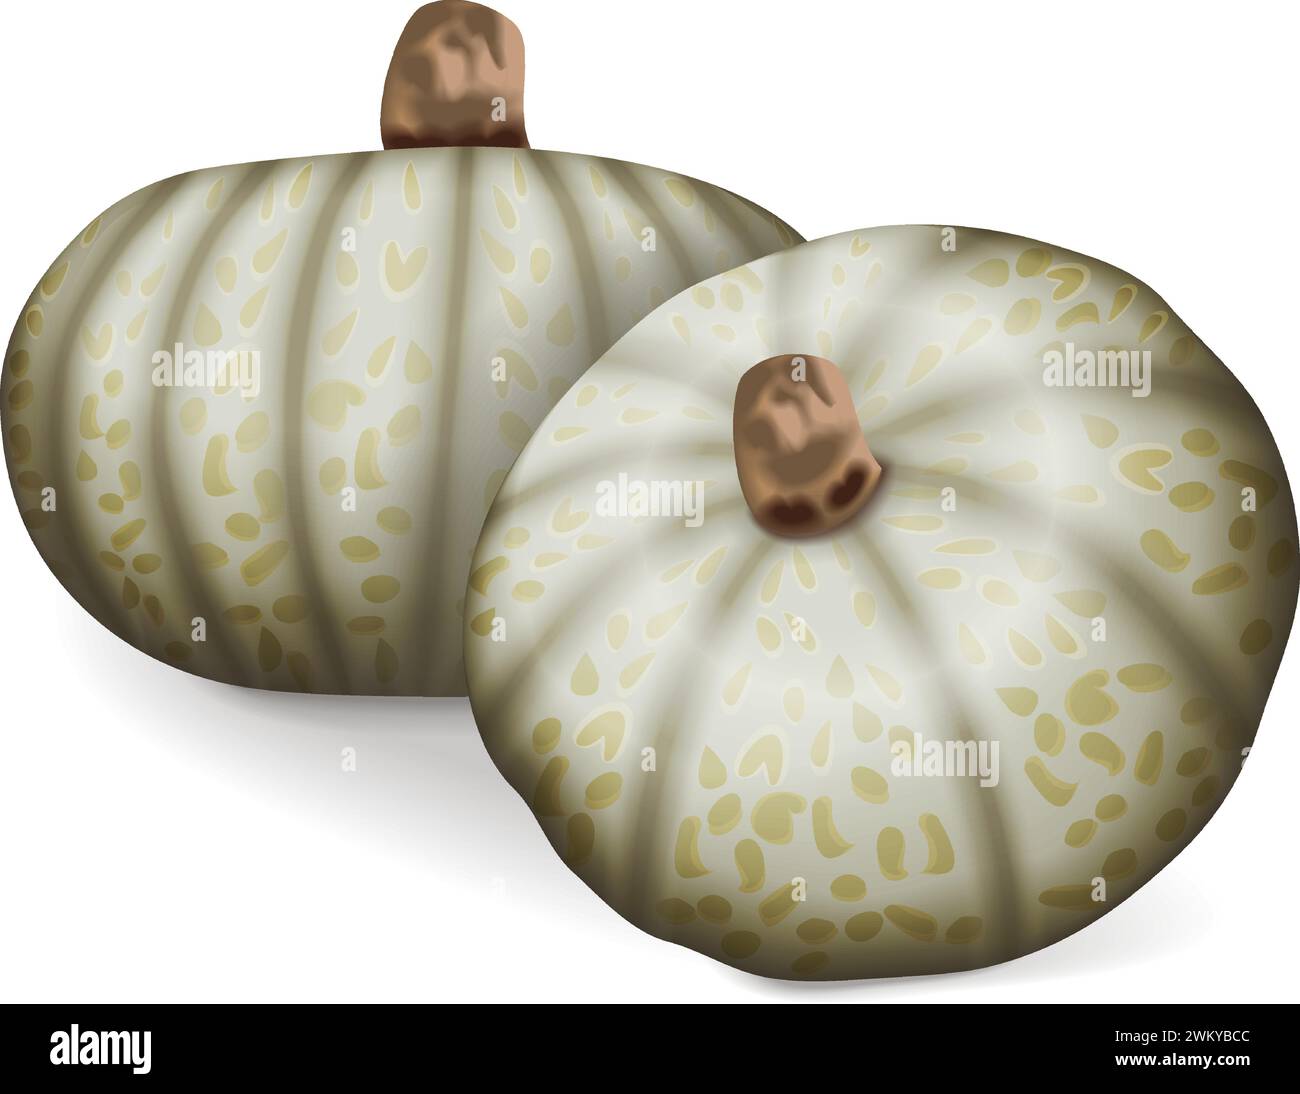 Group of Confection squash. Winter squash. Cucurbita maxima. Fruits and vegetables. Isolated vector illustration. Stock Vector